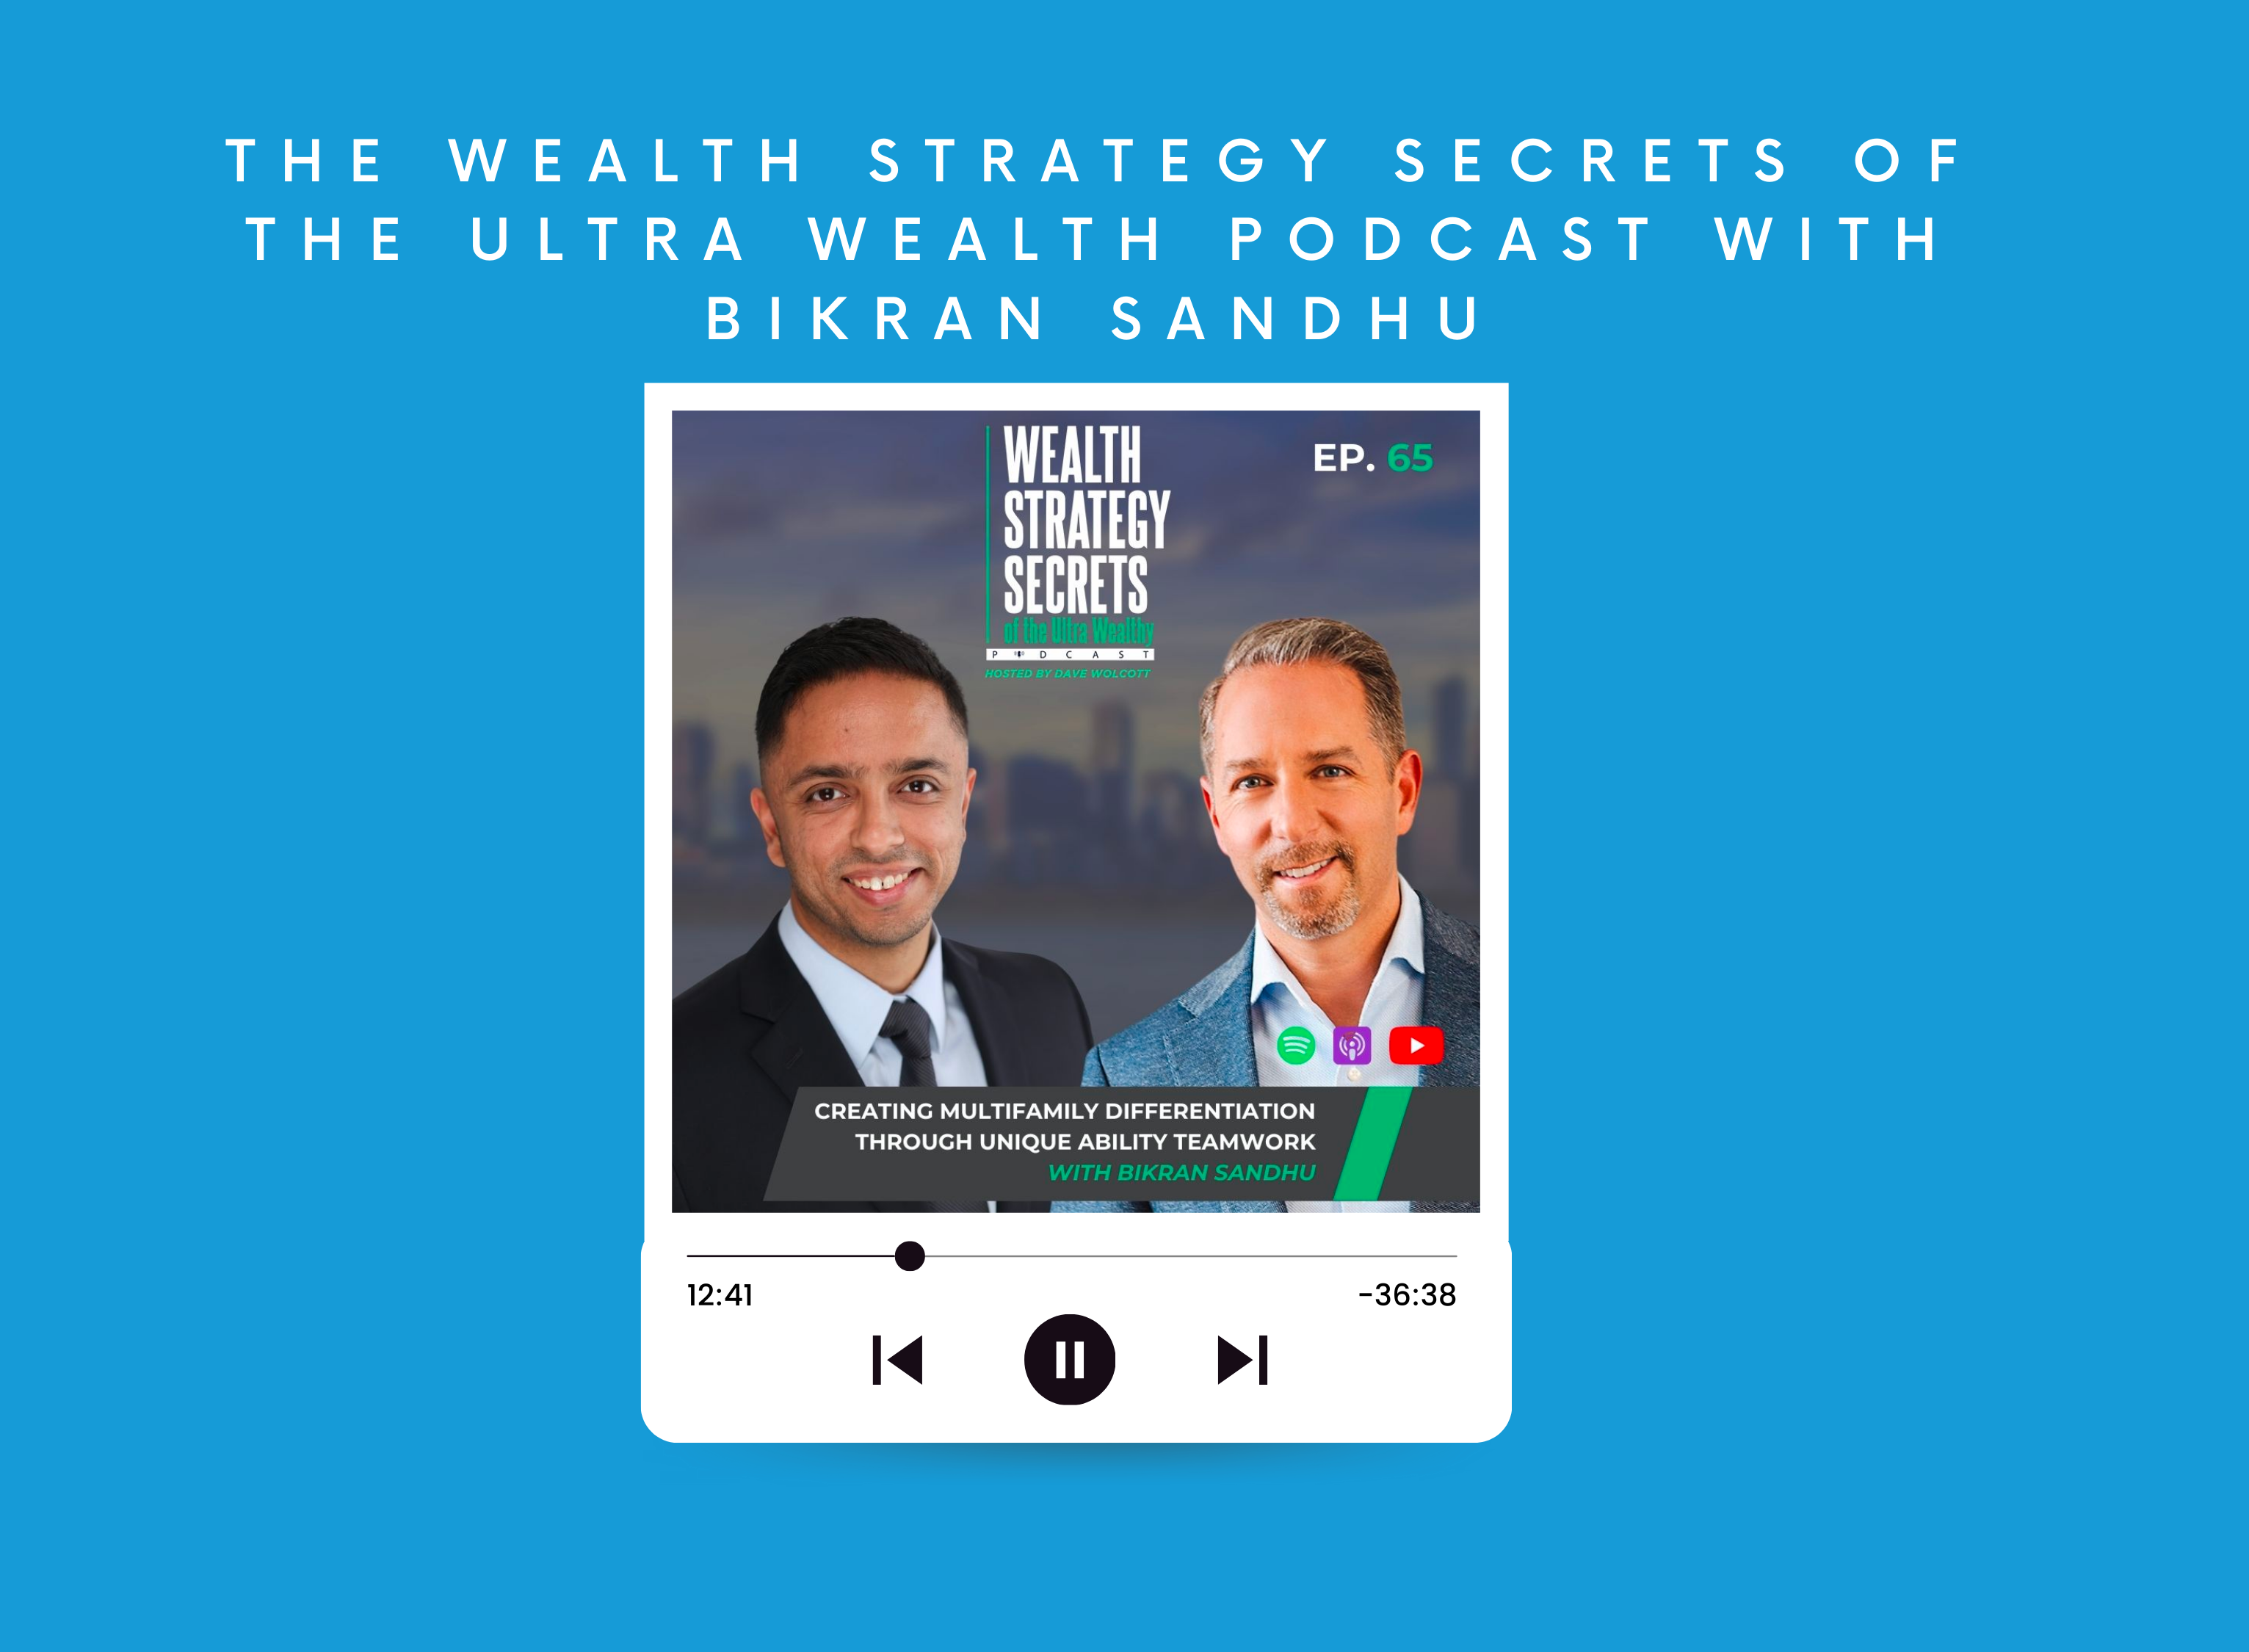 The Wealth Strategy Secrets of the Ultra Wealth Podcast with Bikran Sandhu